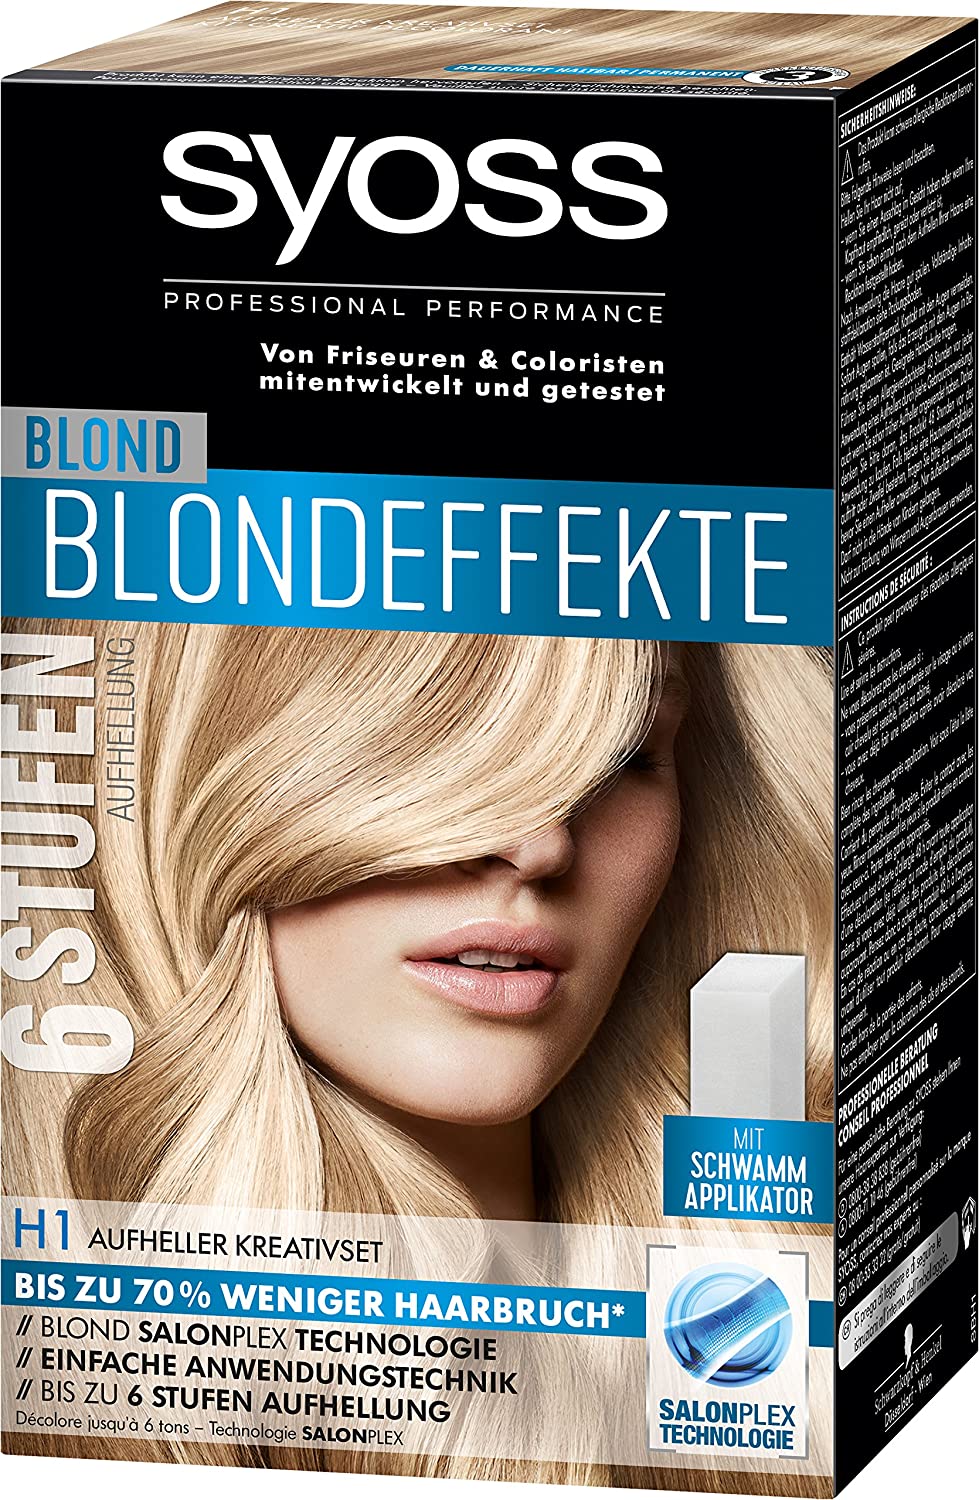 Syoss specialist Performance Blonde Effects Hair Color Level 3 3 x 95 ml, brown ‎light